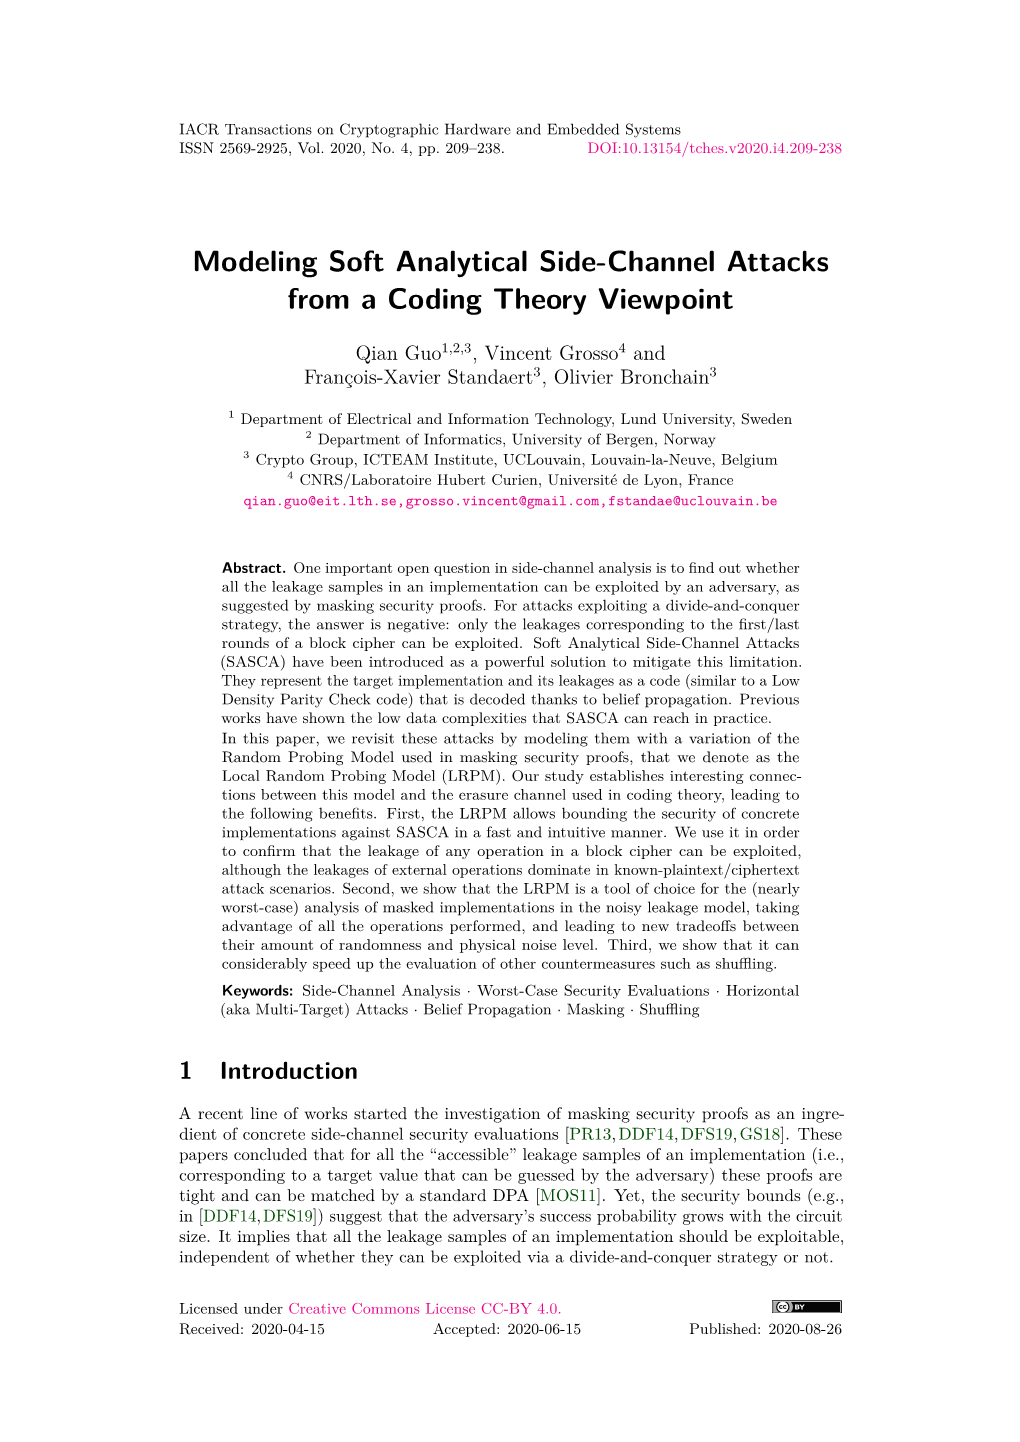 Modeling Soft Analytical Side-Channel Attacks from a Coding Theory Viewpoint